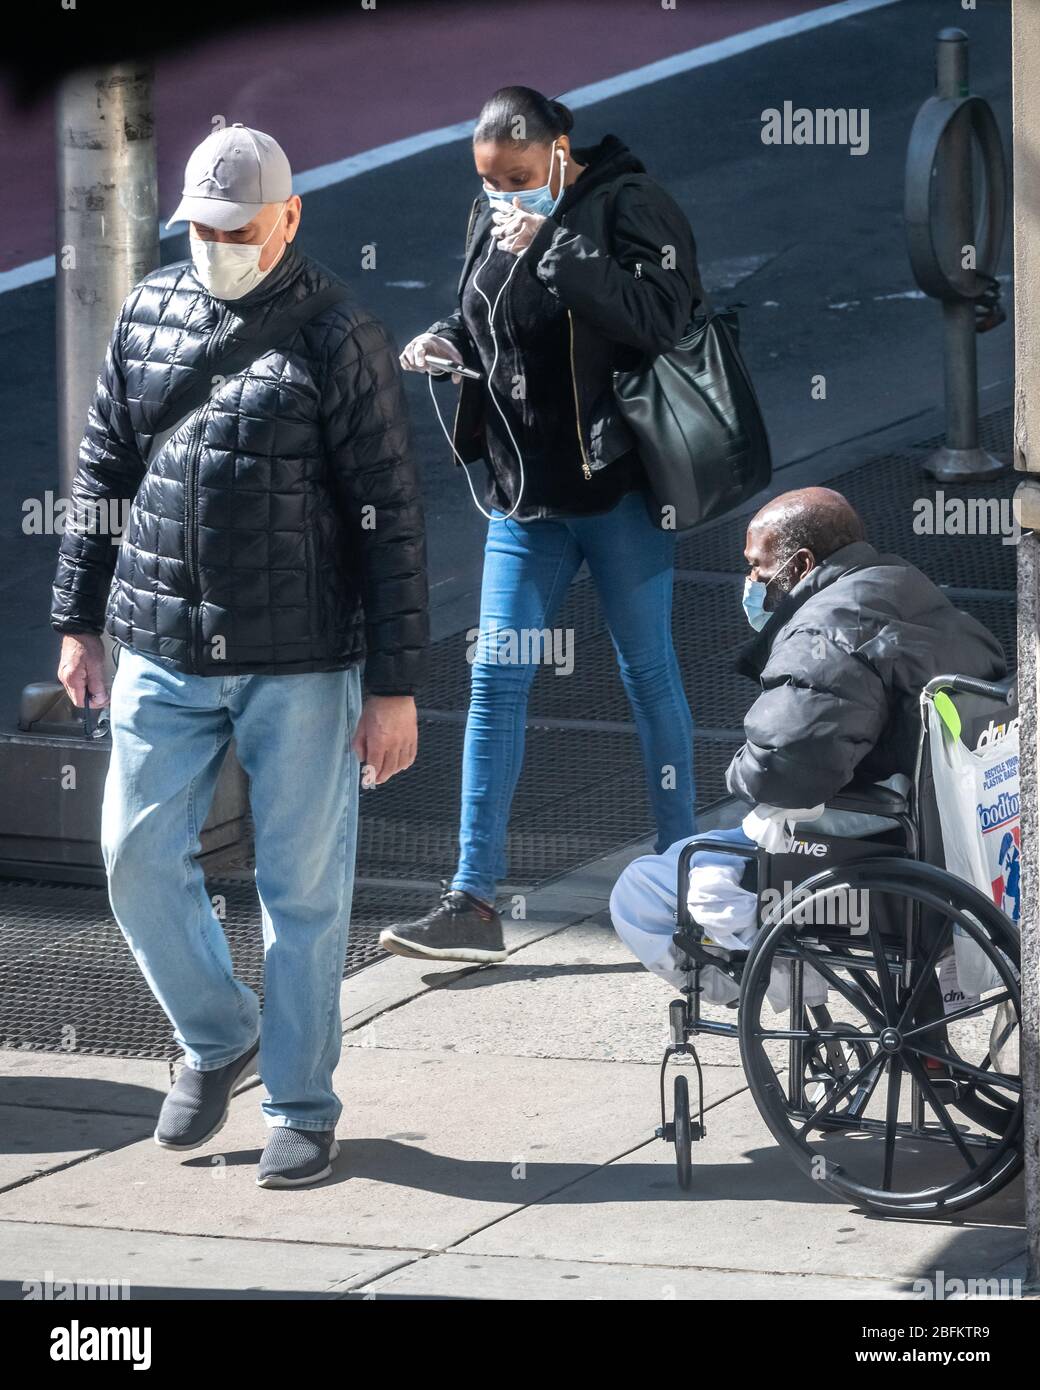 New York, USA. 19th Apr, 2020. Wearing face masks, people walk past a homeless beggar in New York City. The government stated that Newyorkers should cover their faces when they go outside and cannot mantain social distancing, to prevent coronavirus spread. Credit: Enrique Shore/Alamy Live News Stock Photo